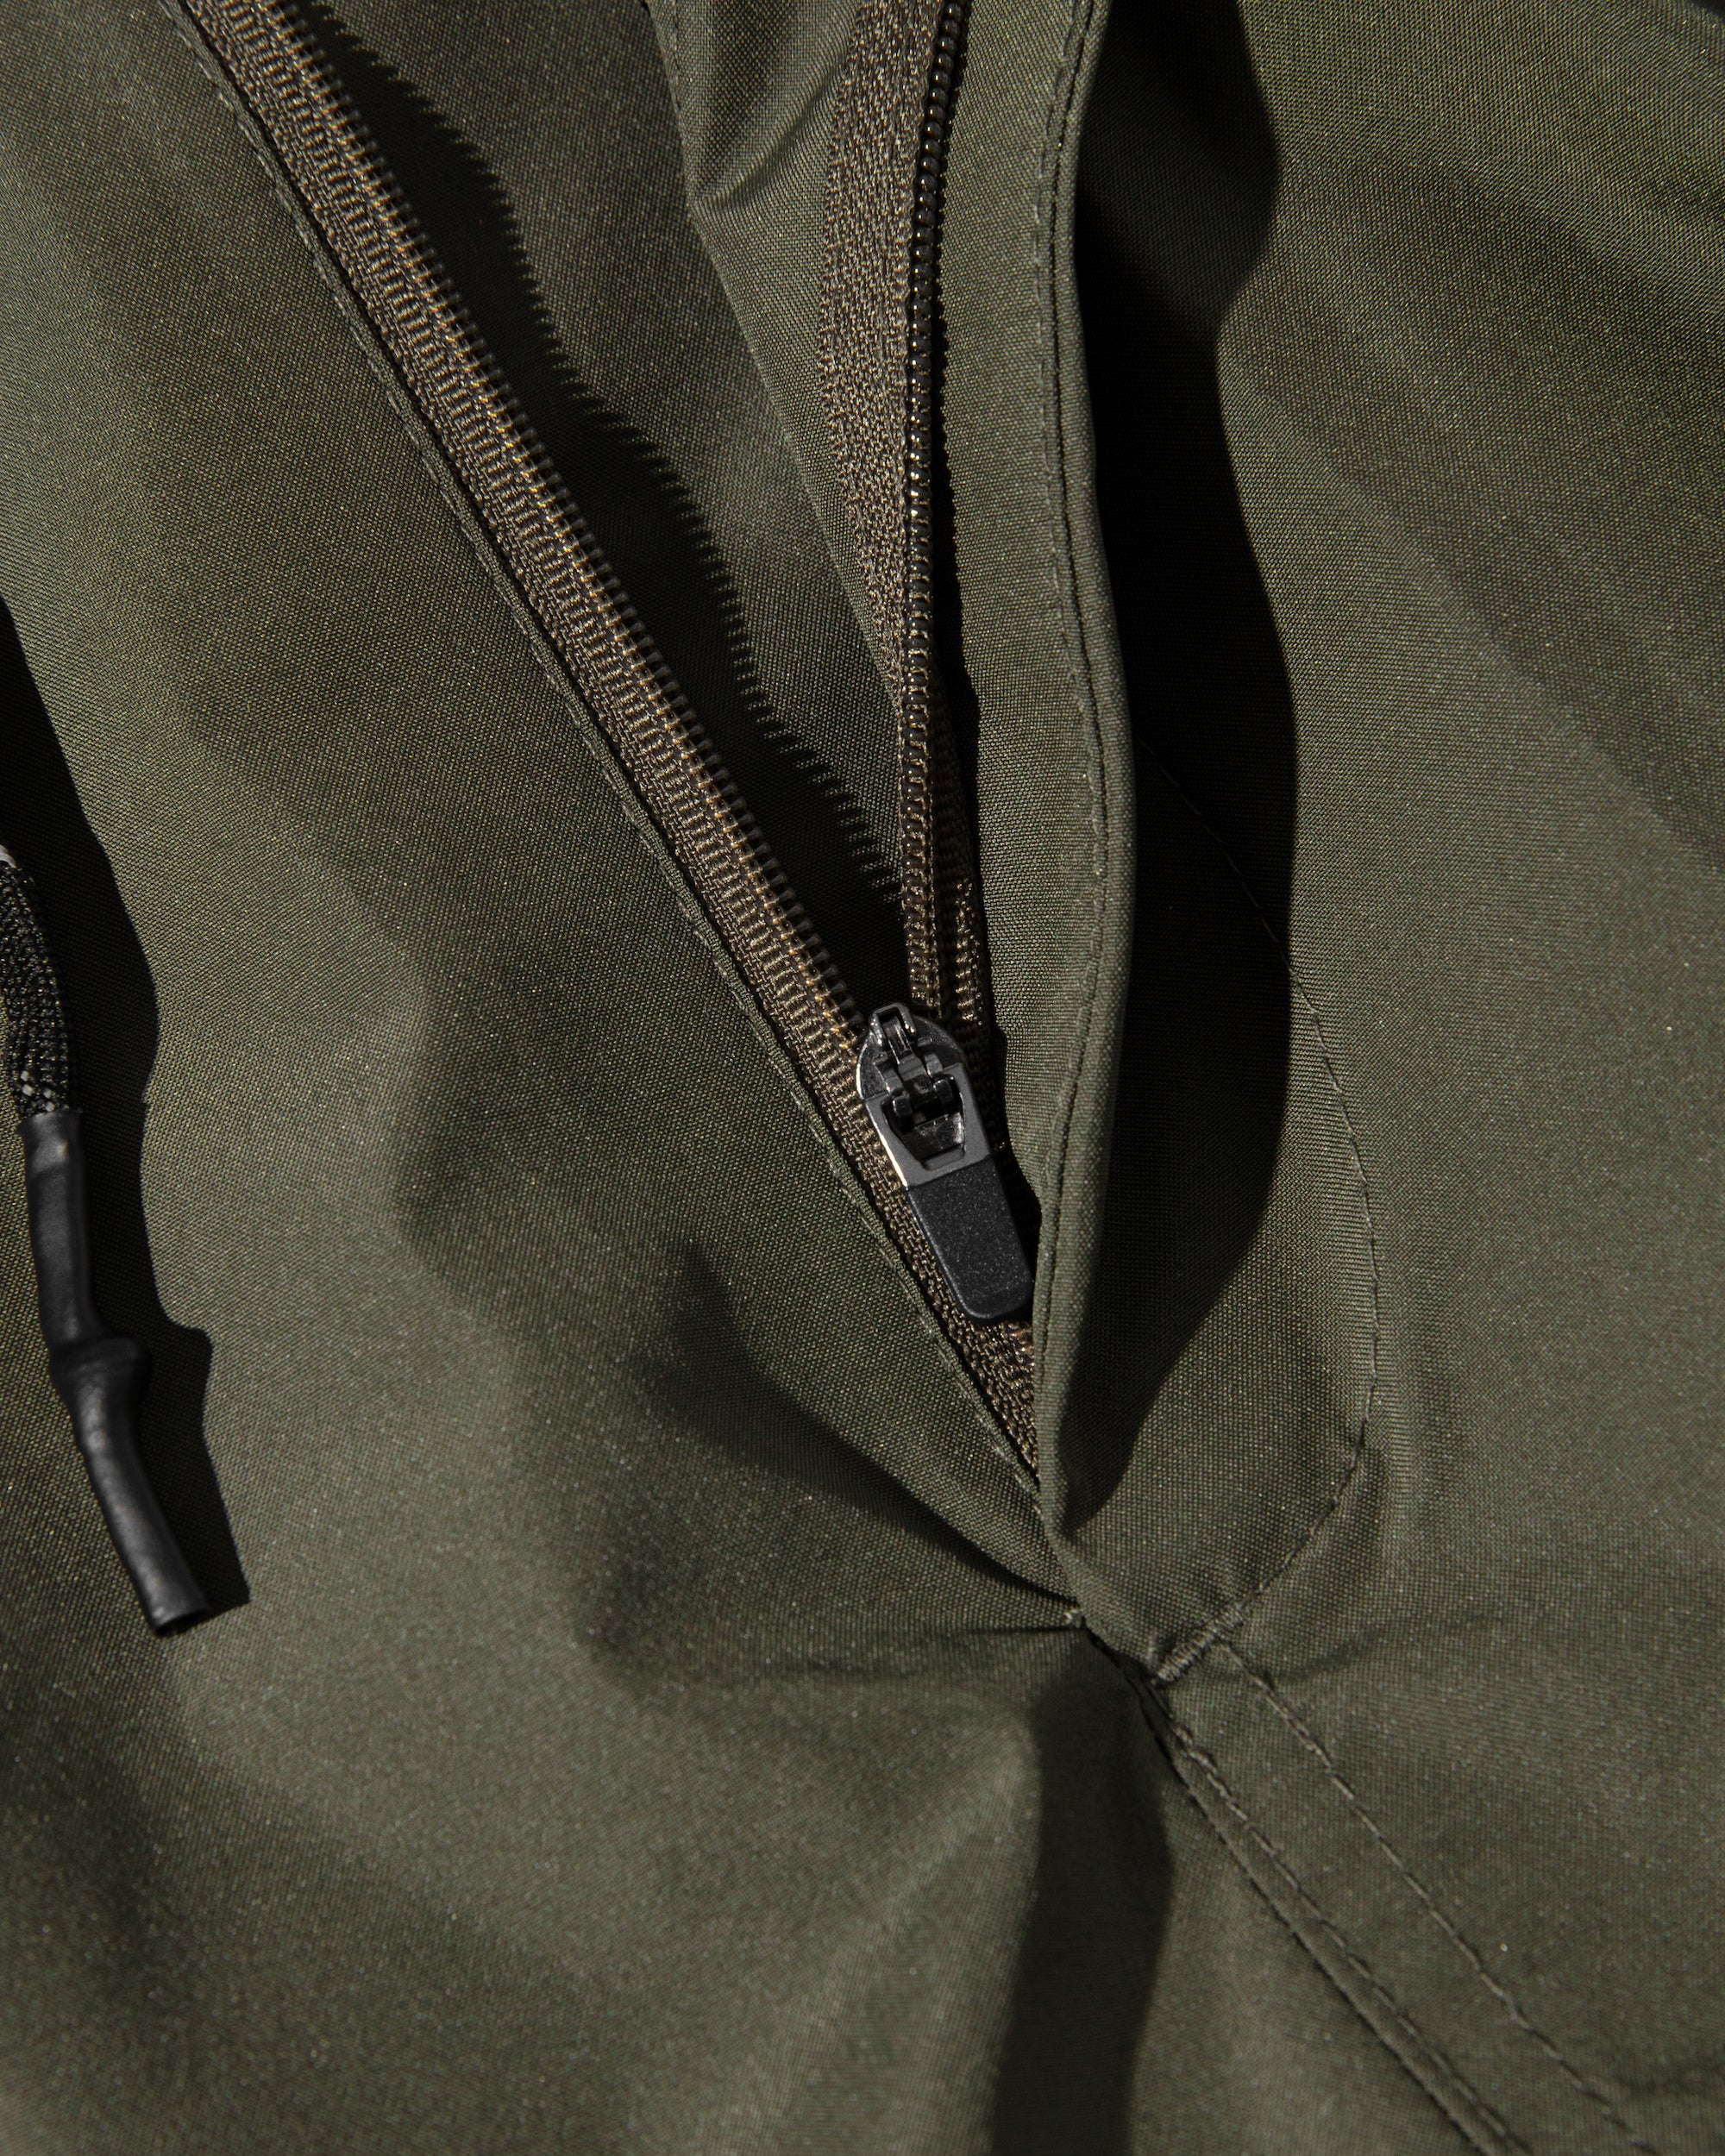 【5.1 WED 20:00- In stock】+phenix WINDSTOPPER® by GORE-TEX LABS CITY OVER TROUSERS